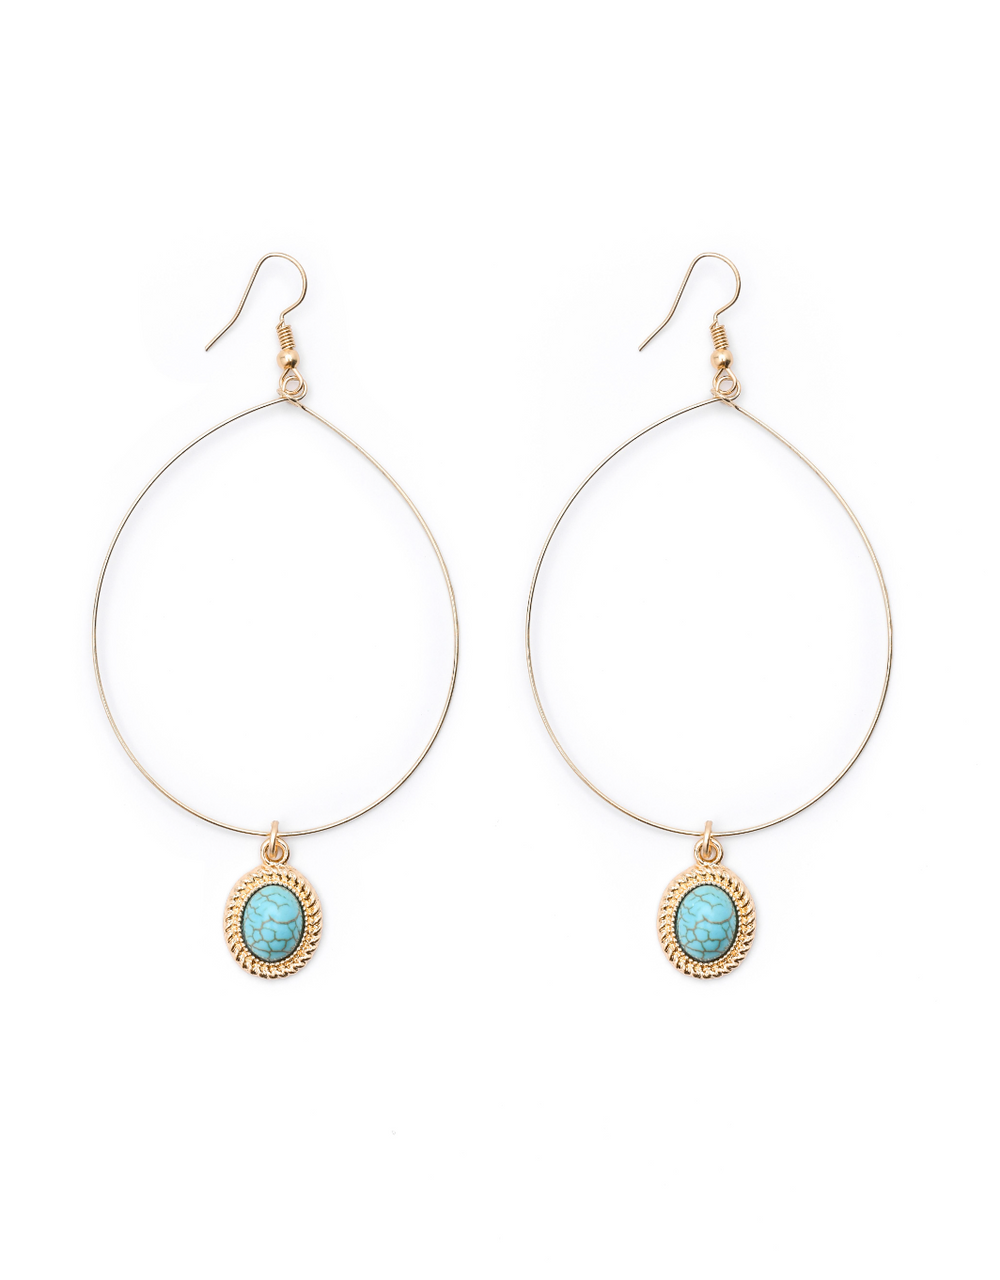 4" Gold Wire Earring with Turquoise Charm